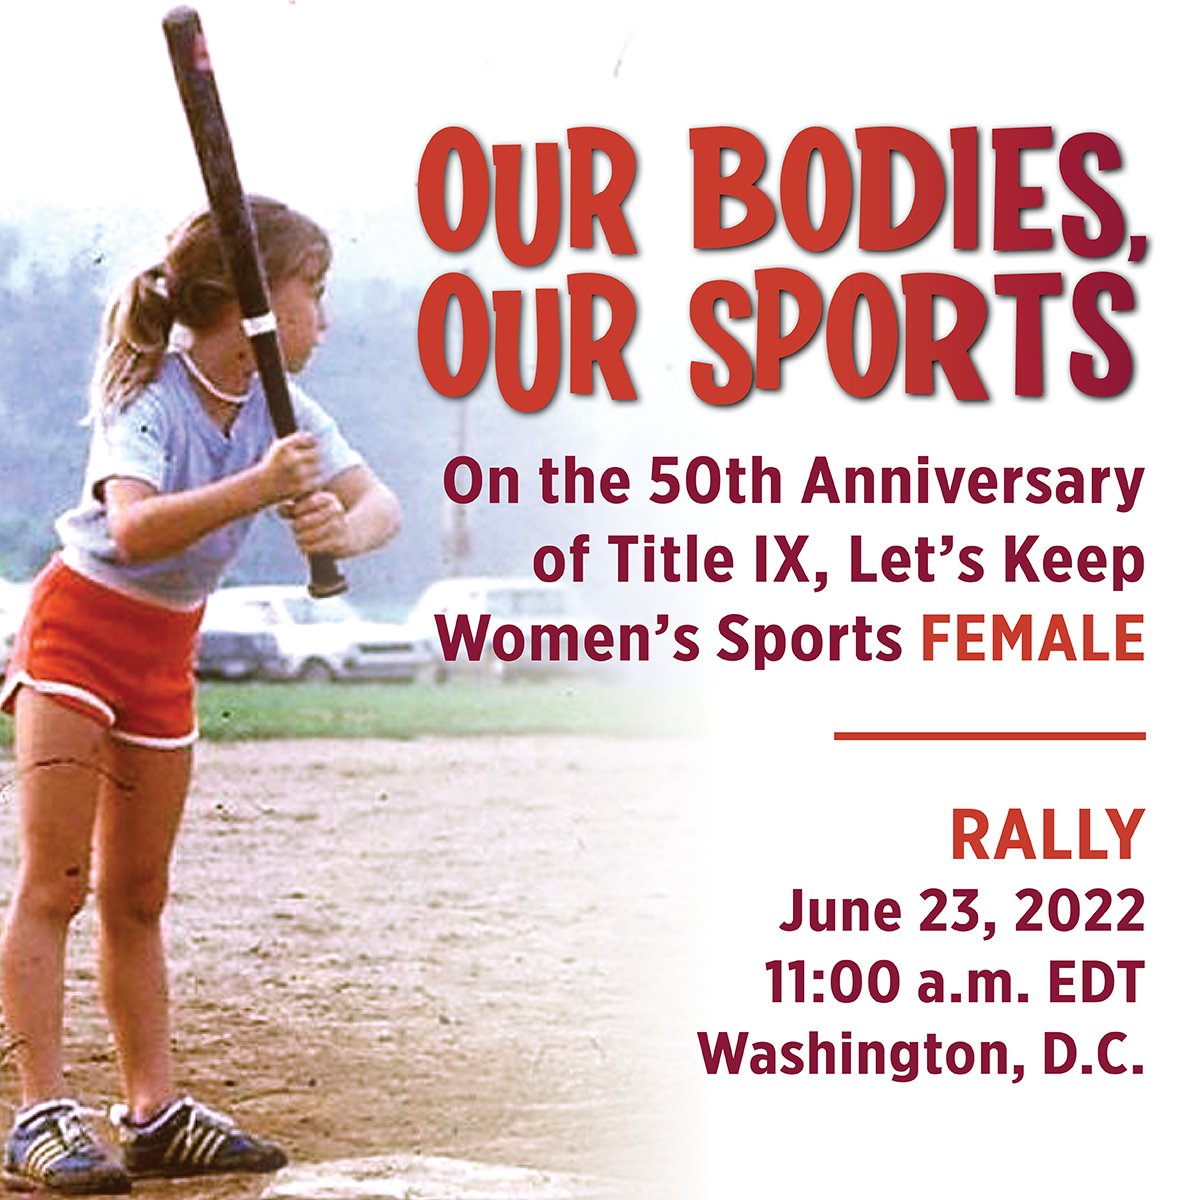 std- WDI USA is participating in a rally to celebrate the 50th anniversary of Title IX. Join WDI USA president @KDansky (standing strong at the plate) to celebrate 50 years of women's sports! Details to come. #OurBodiesOurSports #KeepWomensSportsFemale #WomensSportsWeek